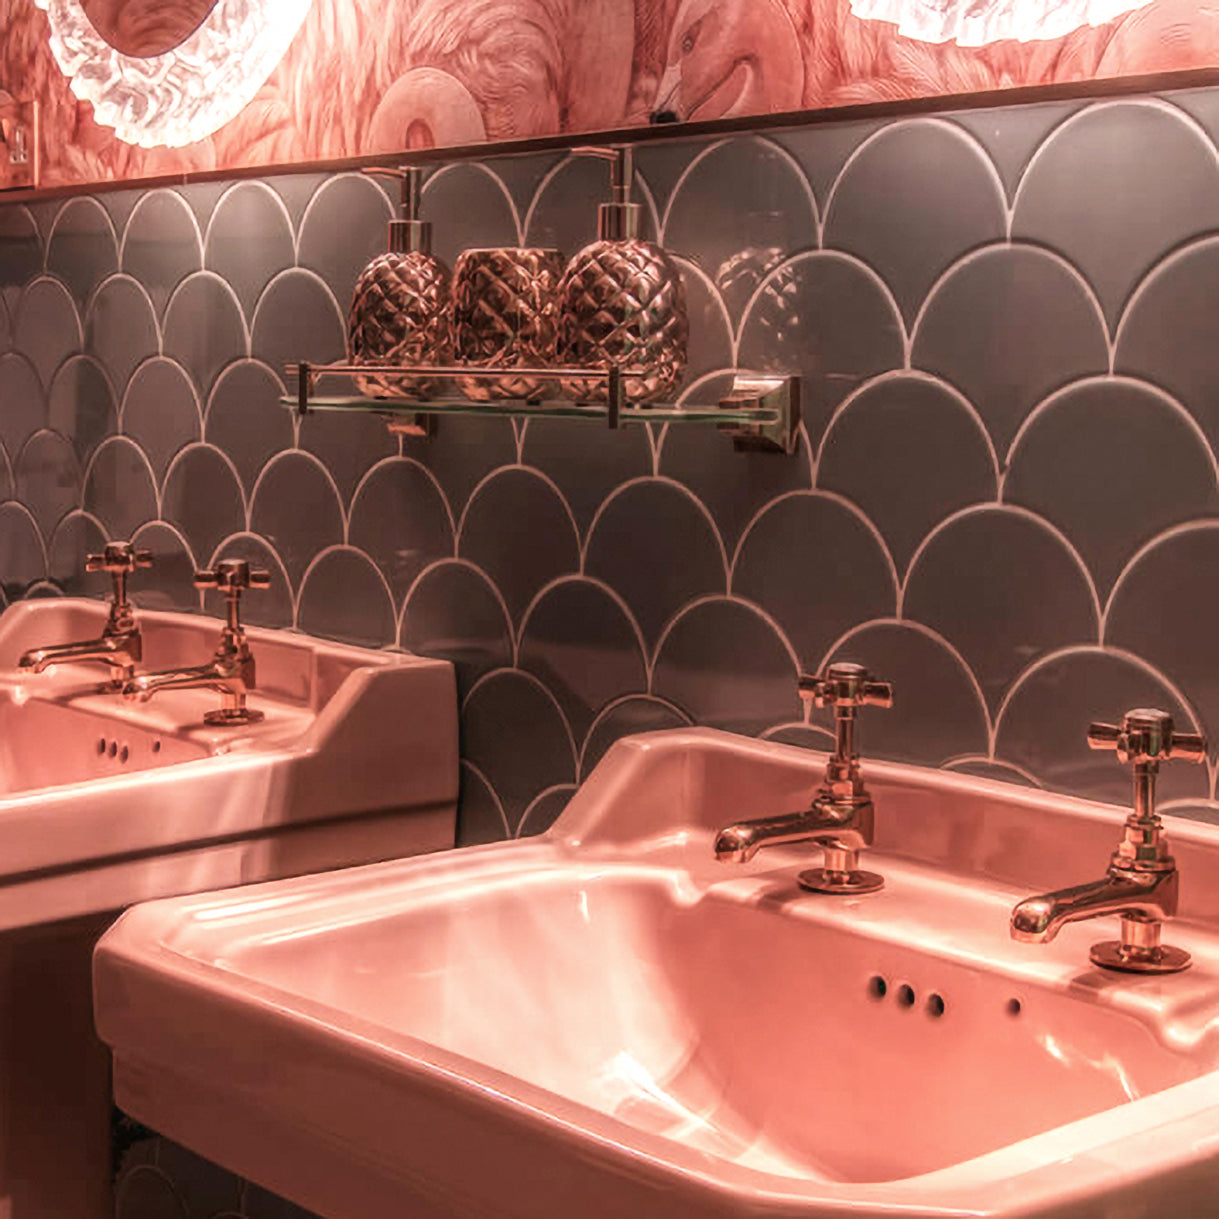 Deco Coral Pink basins sinks, gold taps, Wiki Woo hotel, The Bold Bathroom Company